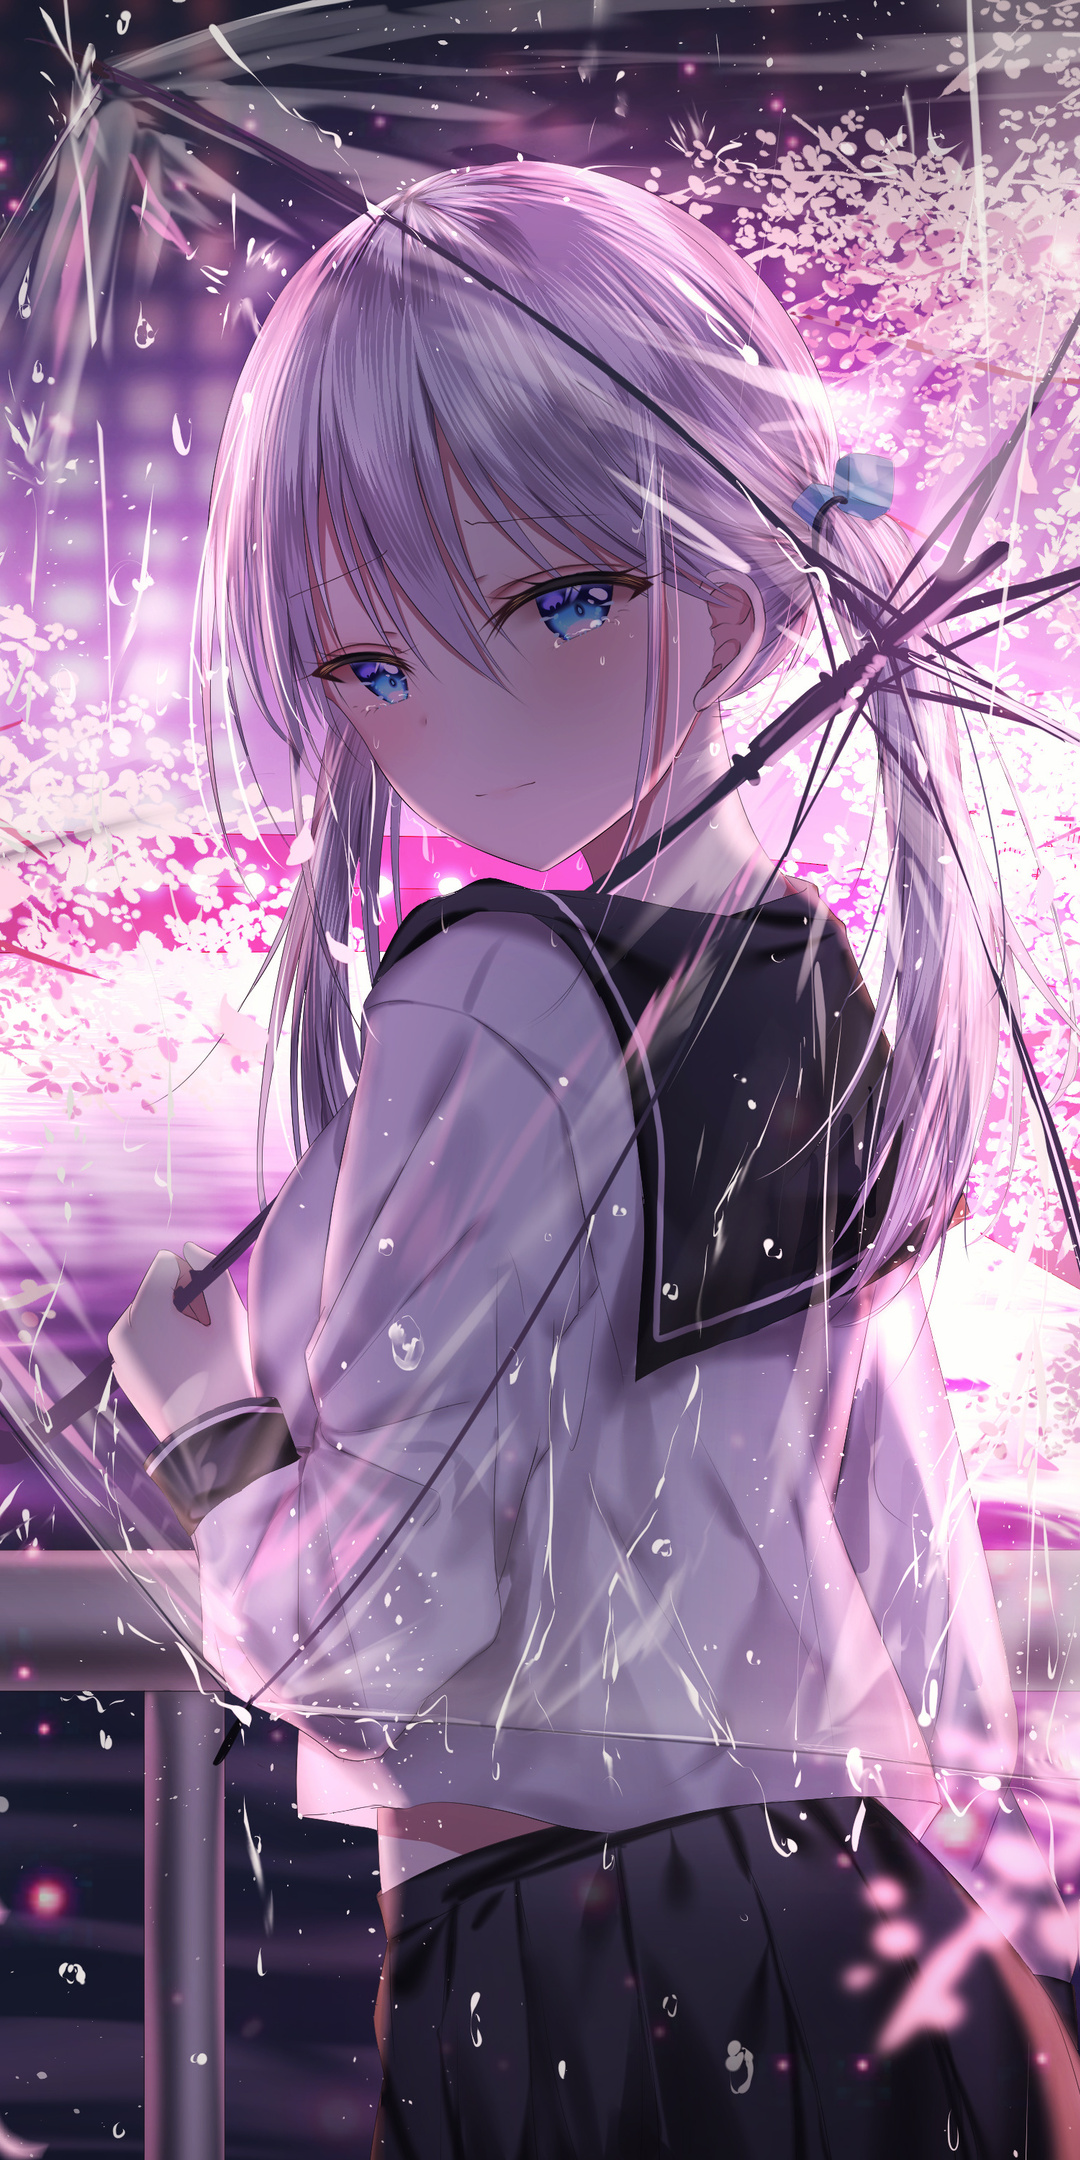 1080x2160 Anime Girl With Umbrella Outdoors Looking Back 5k One Plus  5T,Honor 7x,Honor view 10,Lg Q6 HD 4k Wallpapers, Images, Backgrounds,  Photos and Pictures